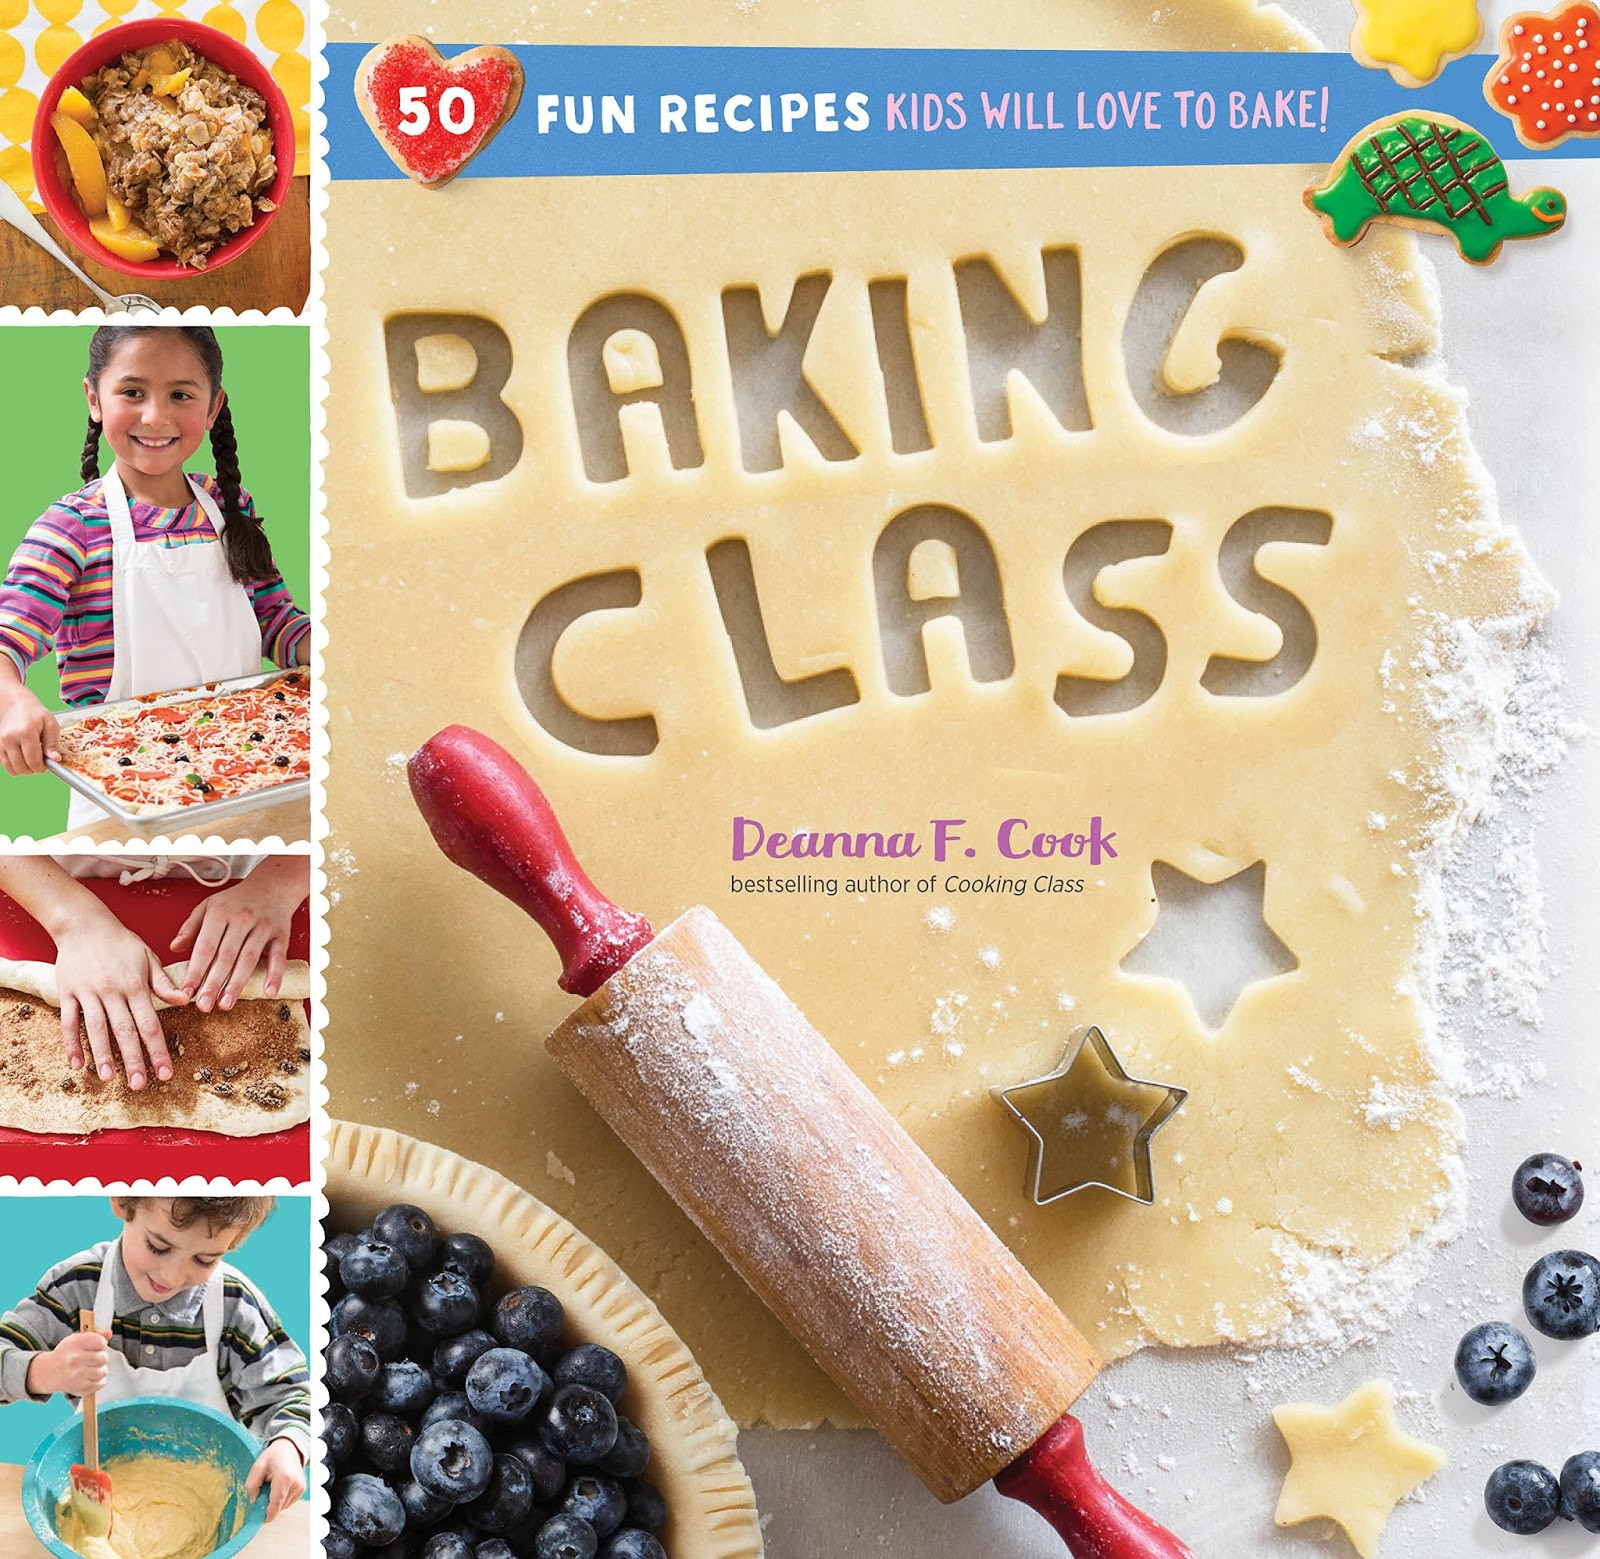 Baking With Kids Recipes
 iHeartLiteracy Baking Class 50 Fun Recipes Kids Will Love